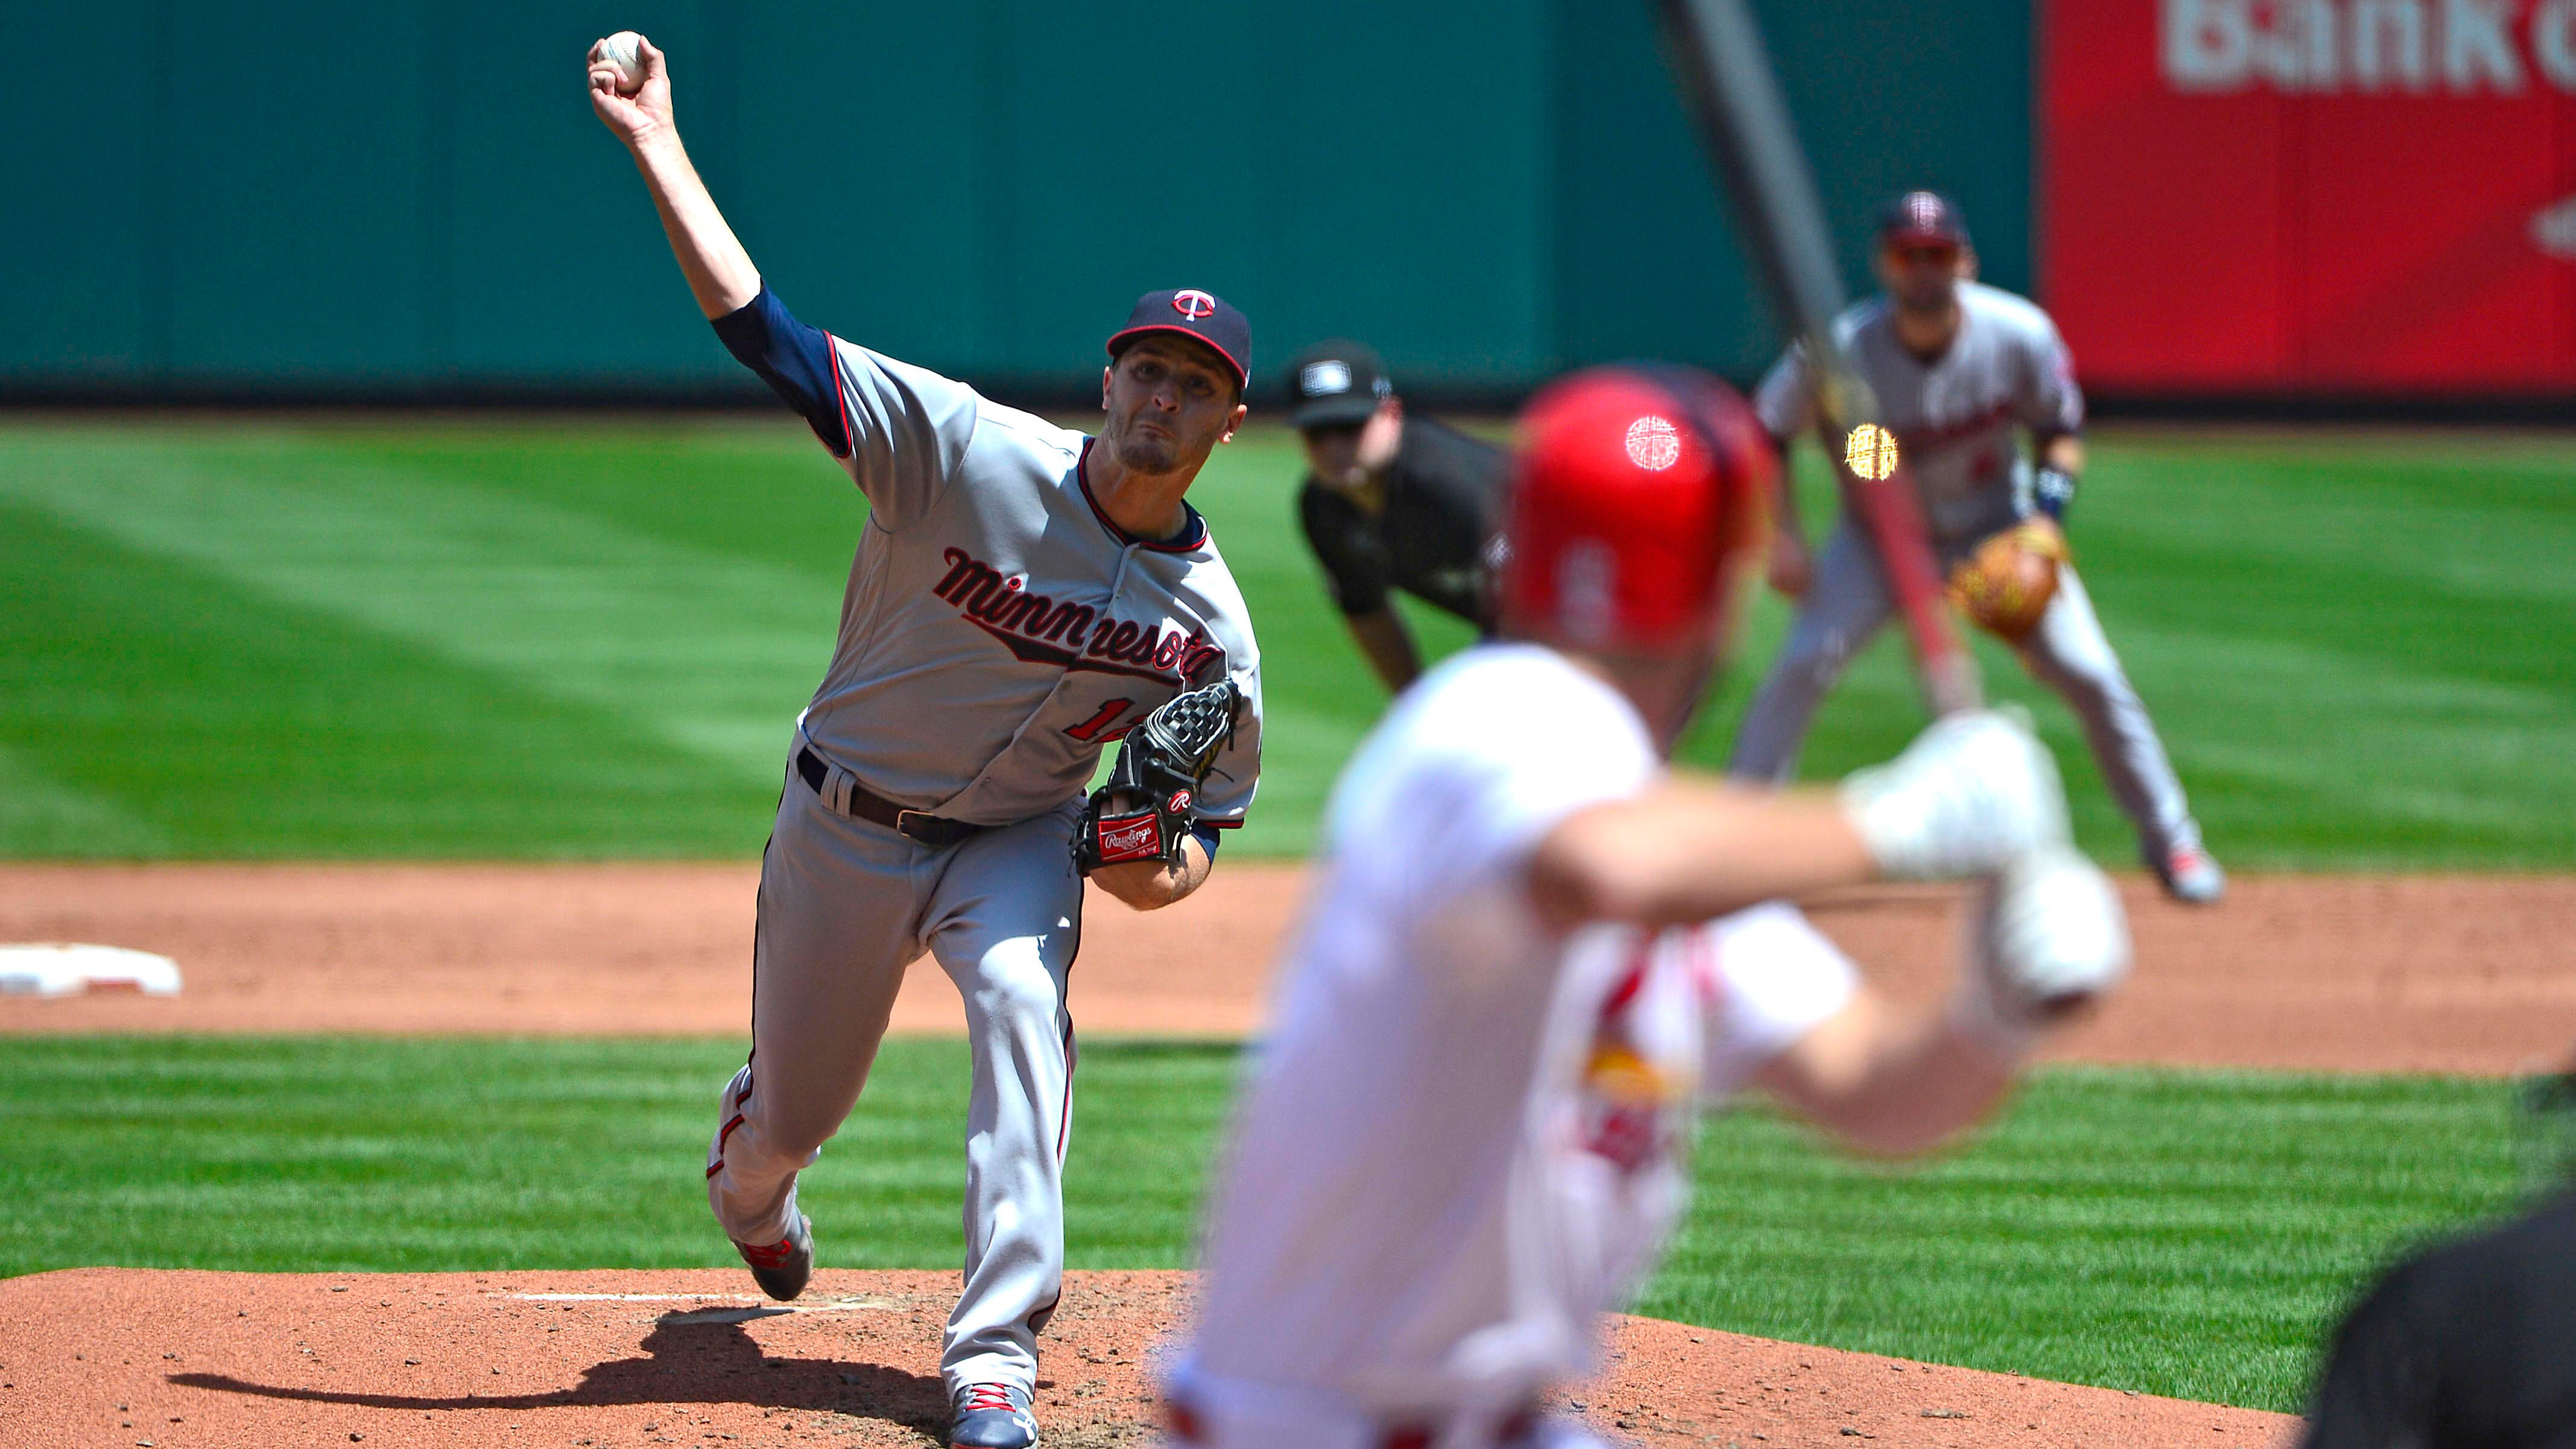 Cardinals' bats again quiet as Twins complete two-game sweep